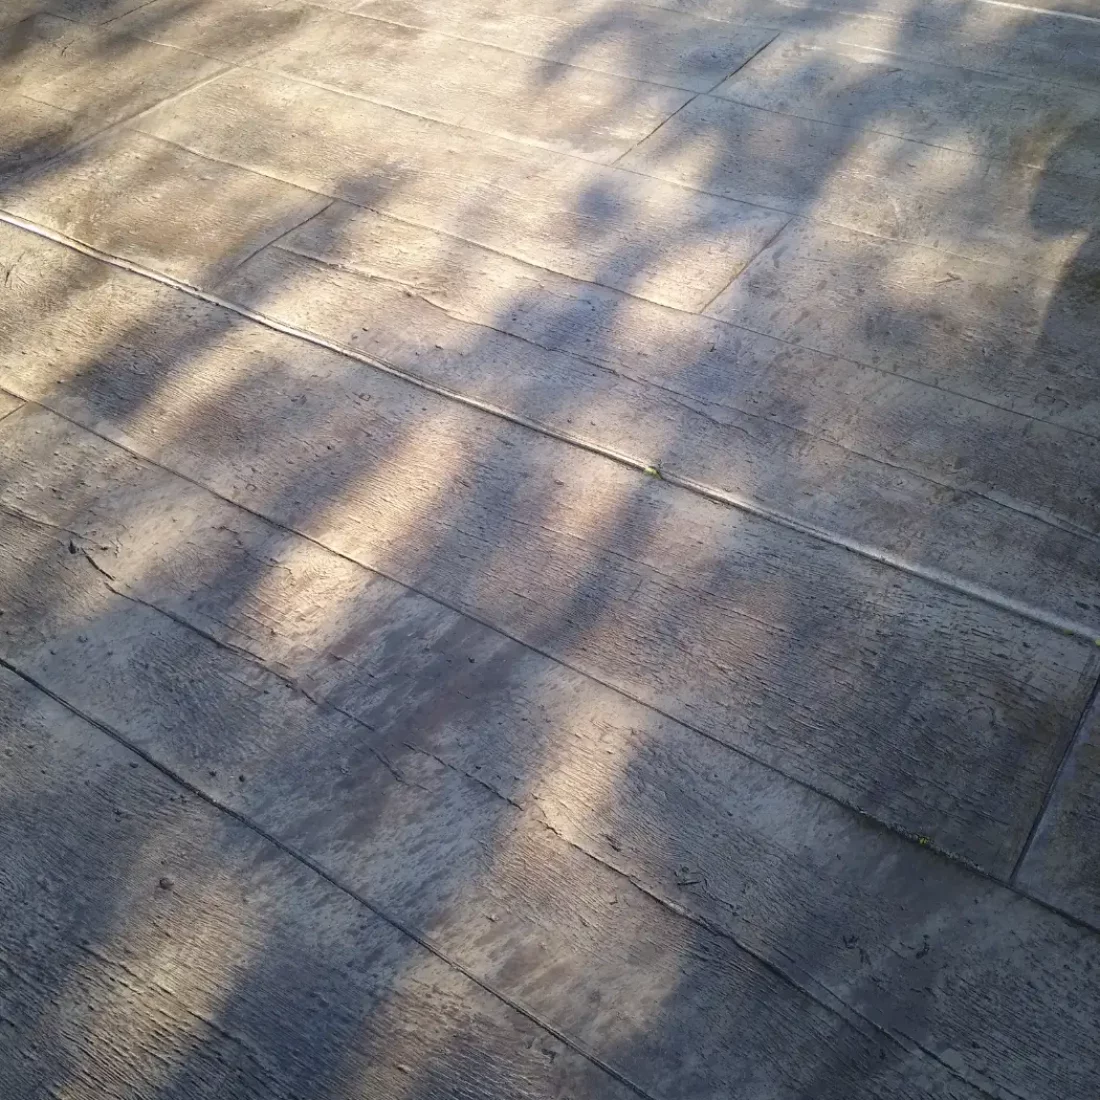 west-valley-city-stamped-concrete-patio-contractor